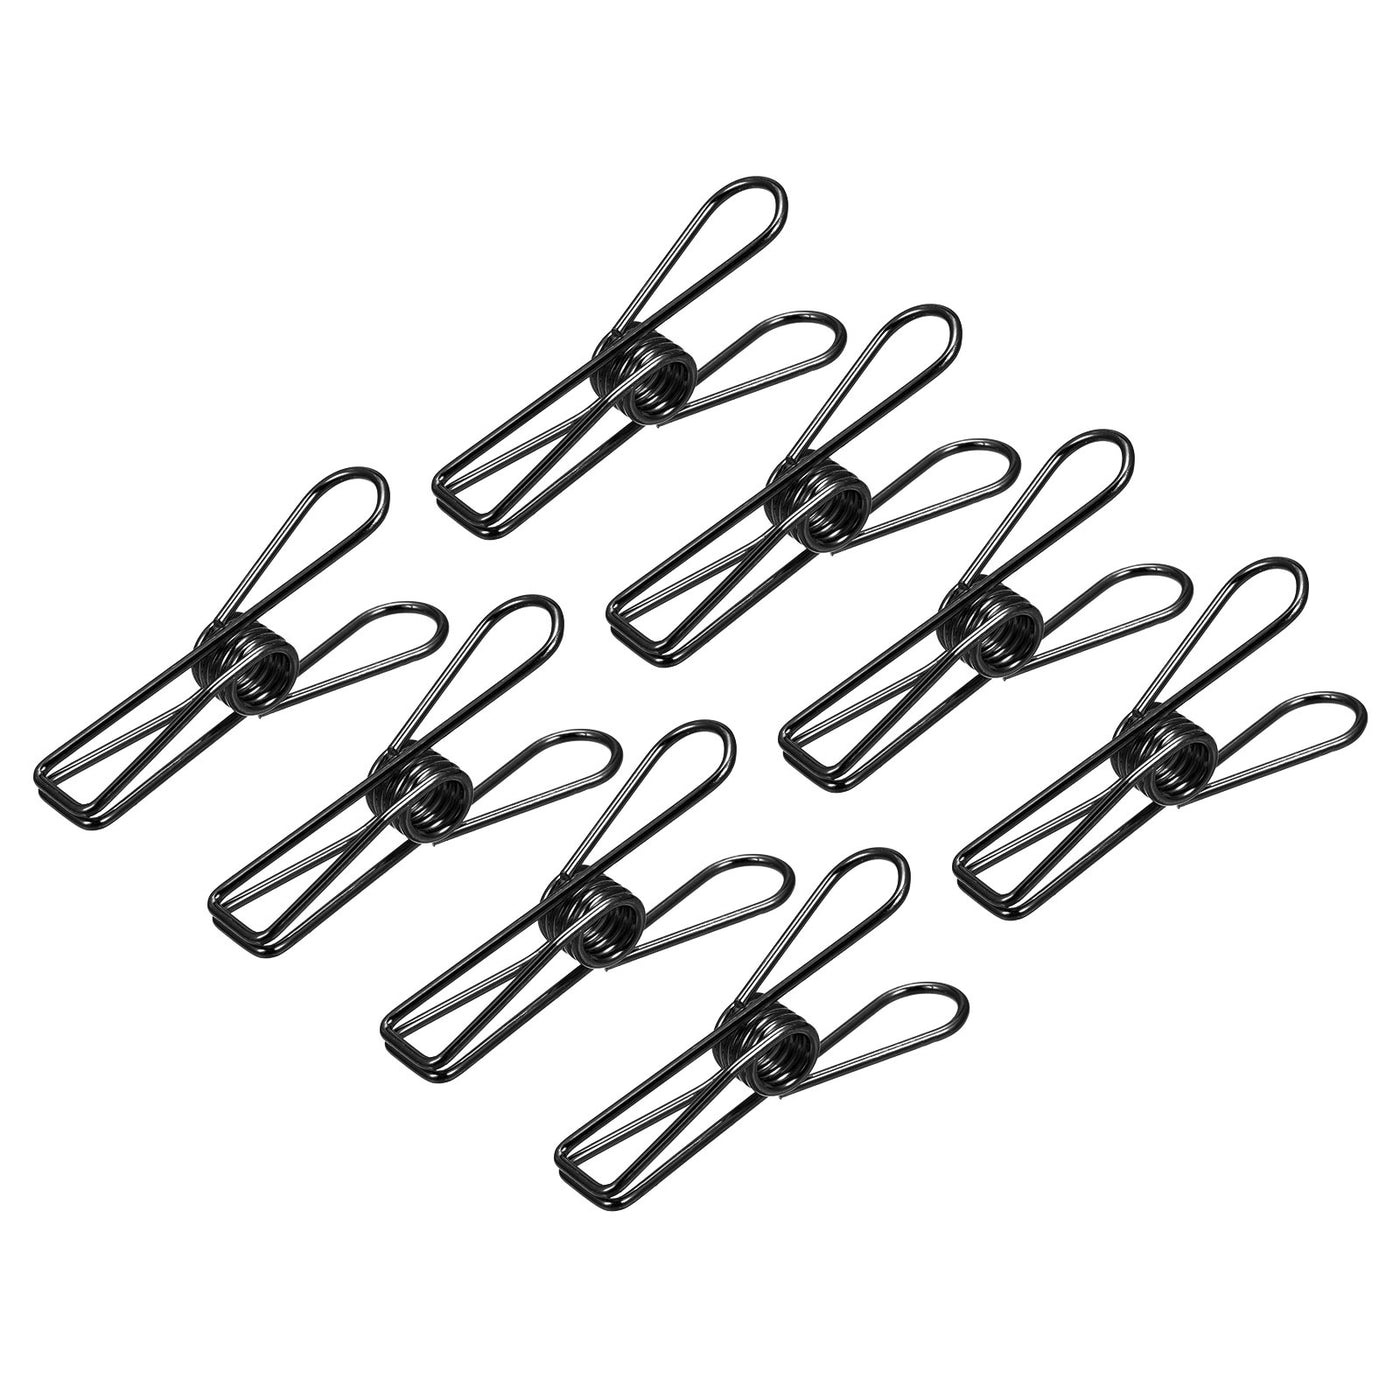 uxcell Uxcell Tablecloth Clips, 55mm Carbon Steel Clamps for Fix Table Cloth, Black 16 Pcs